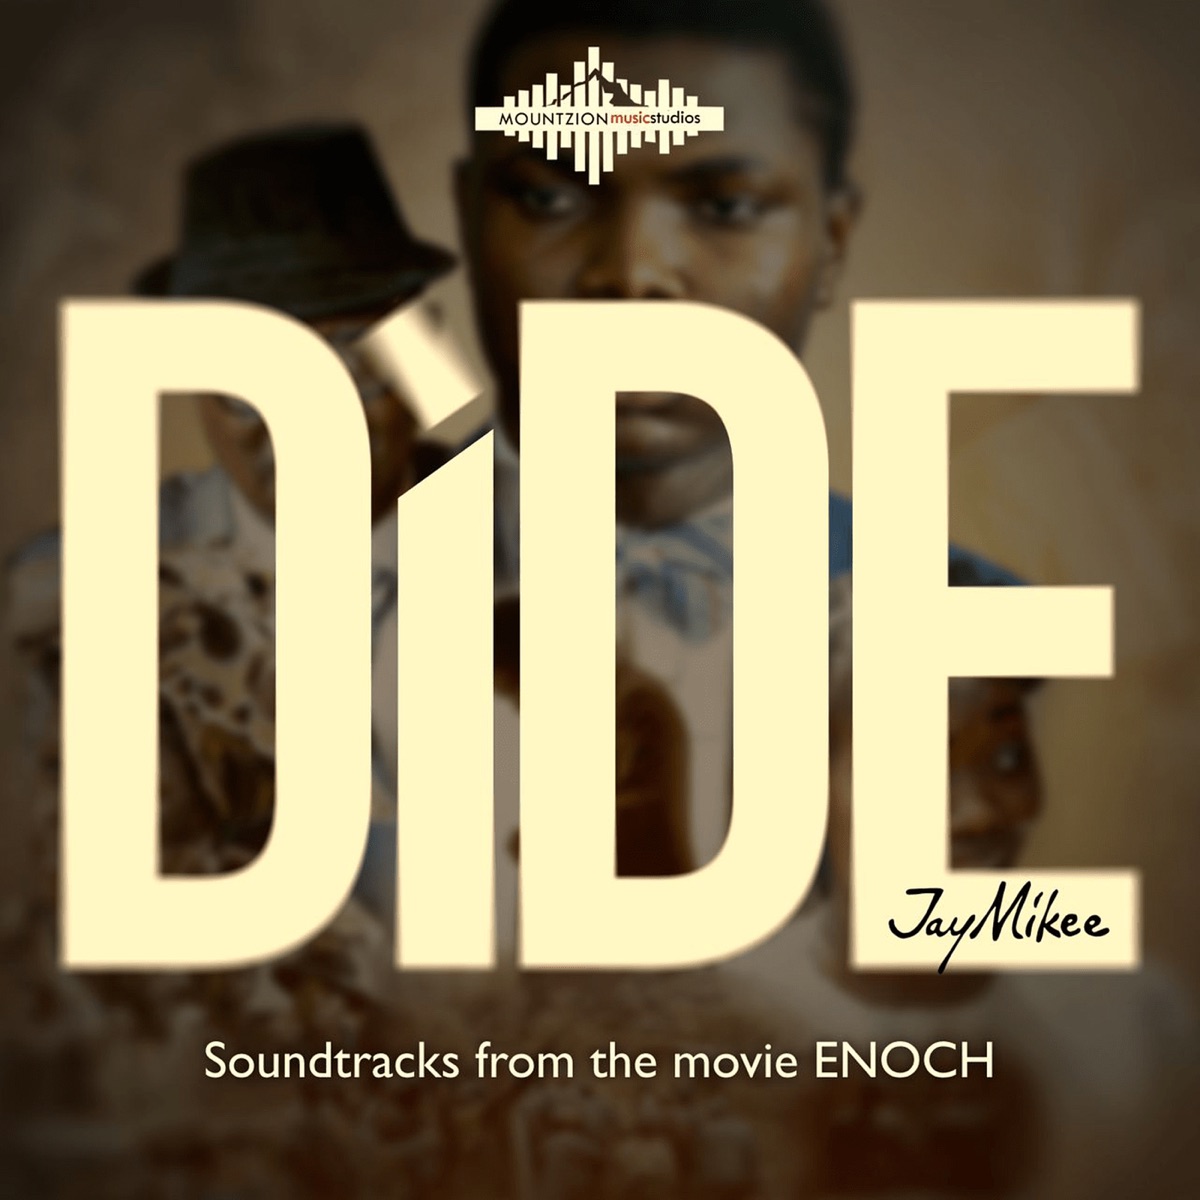 JayMikee - Dide (Soundtracks from the movie ENOCH) - EP